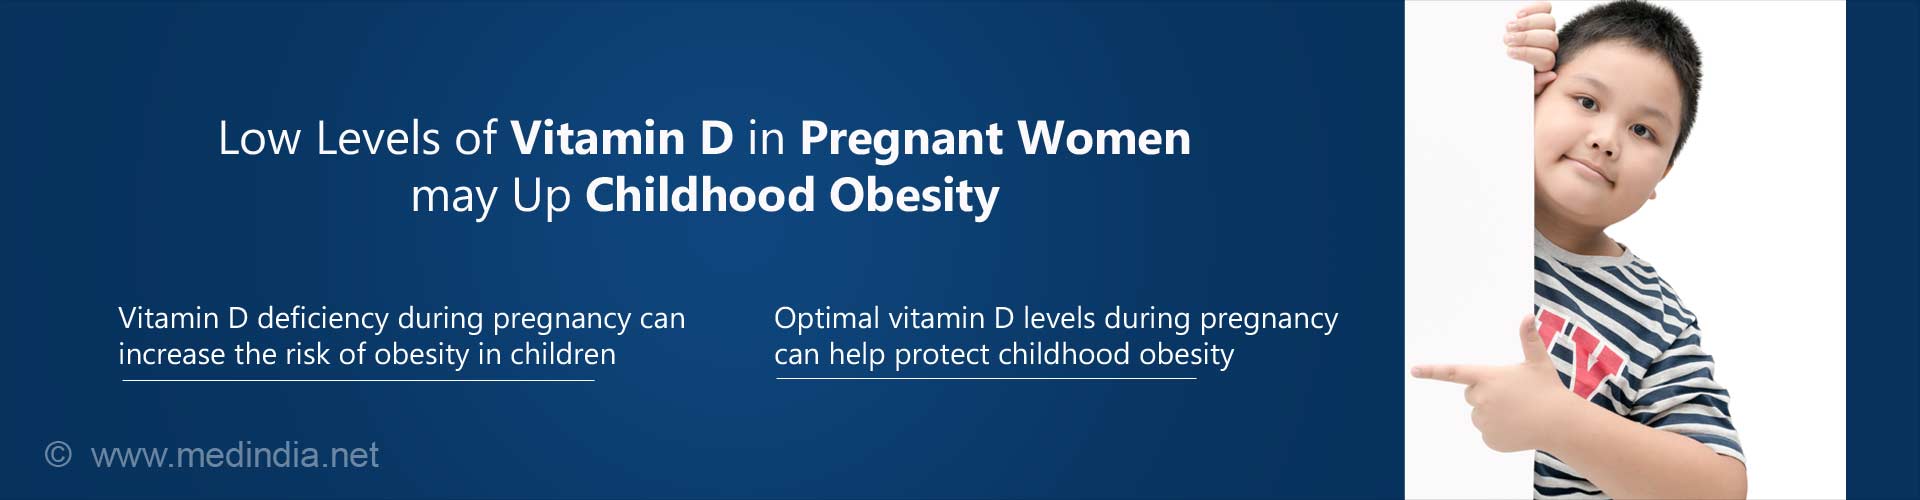 low levels of vitamin D in pregnant women may up childhood obesity
- vitamin D deficiency during pregnancy can increase the risk of obesity in children
- optimal vitamin D levels during pregnancy can help protect childhood obesity